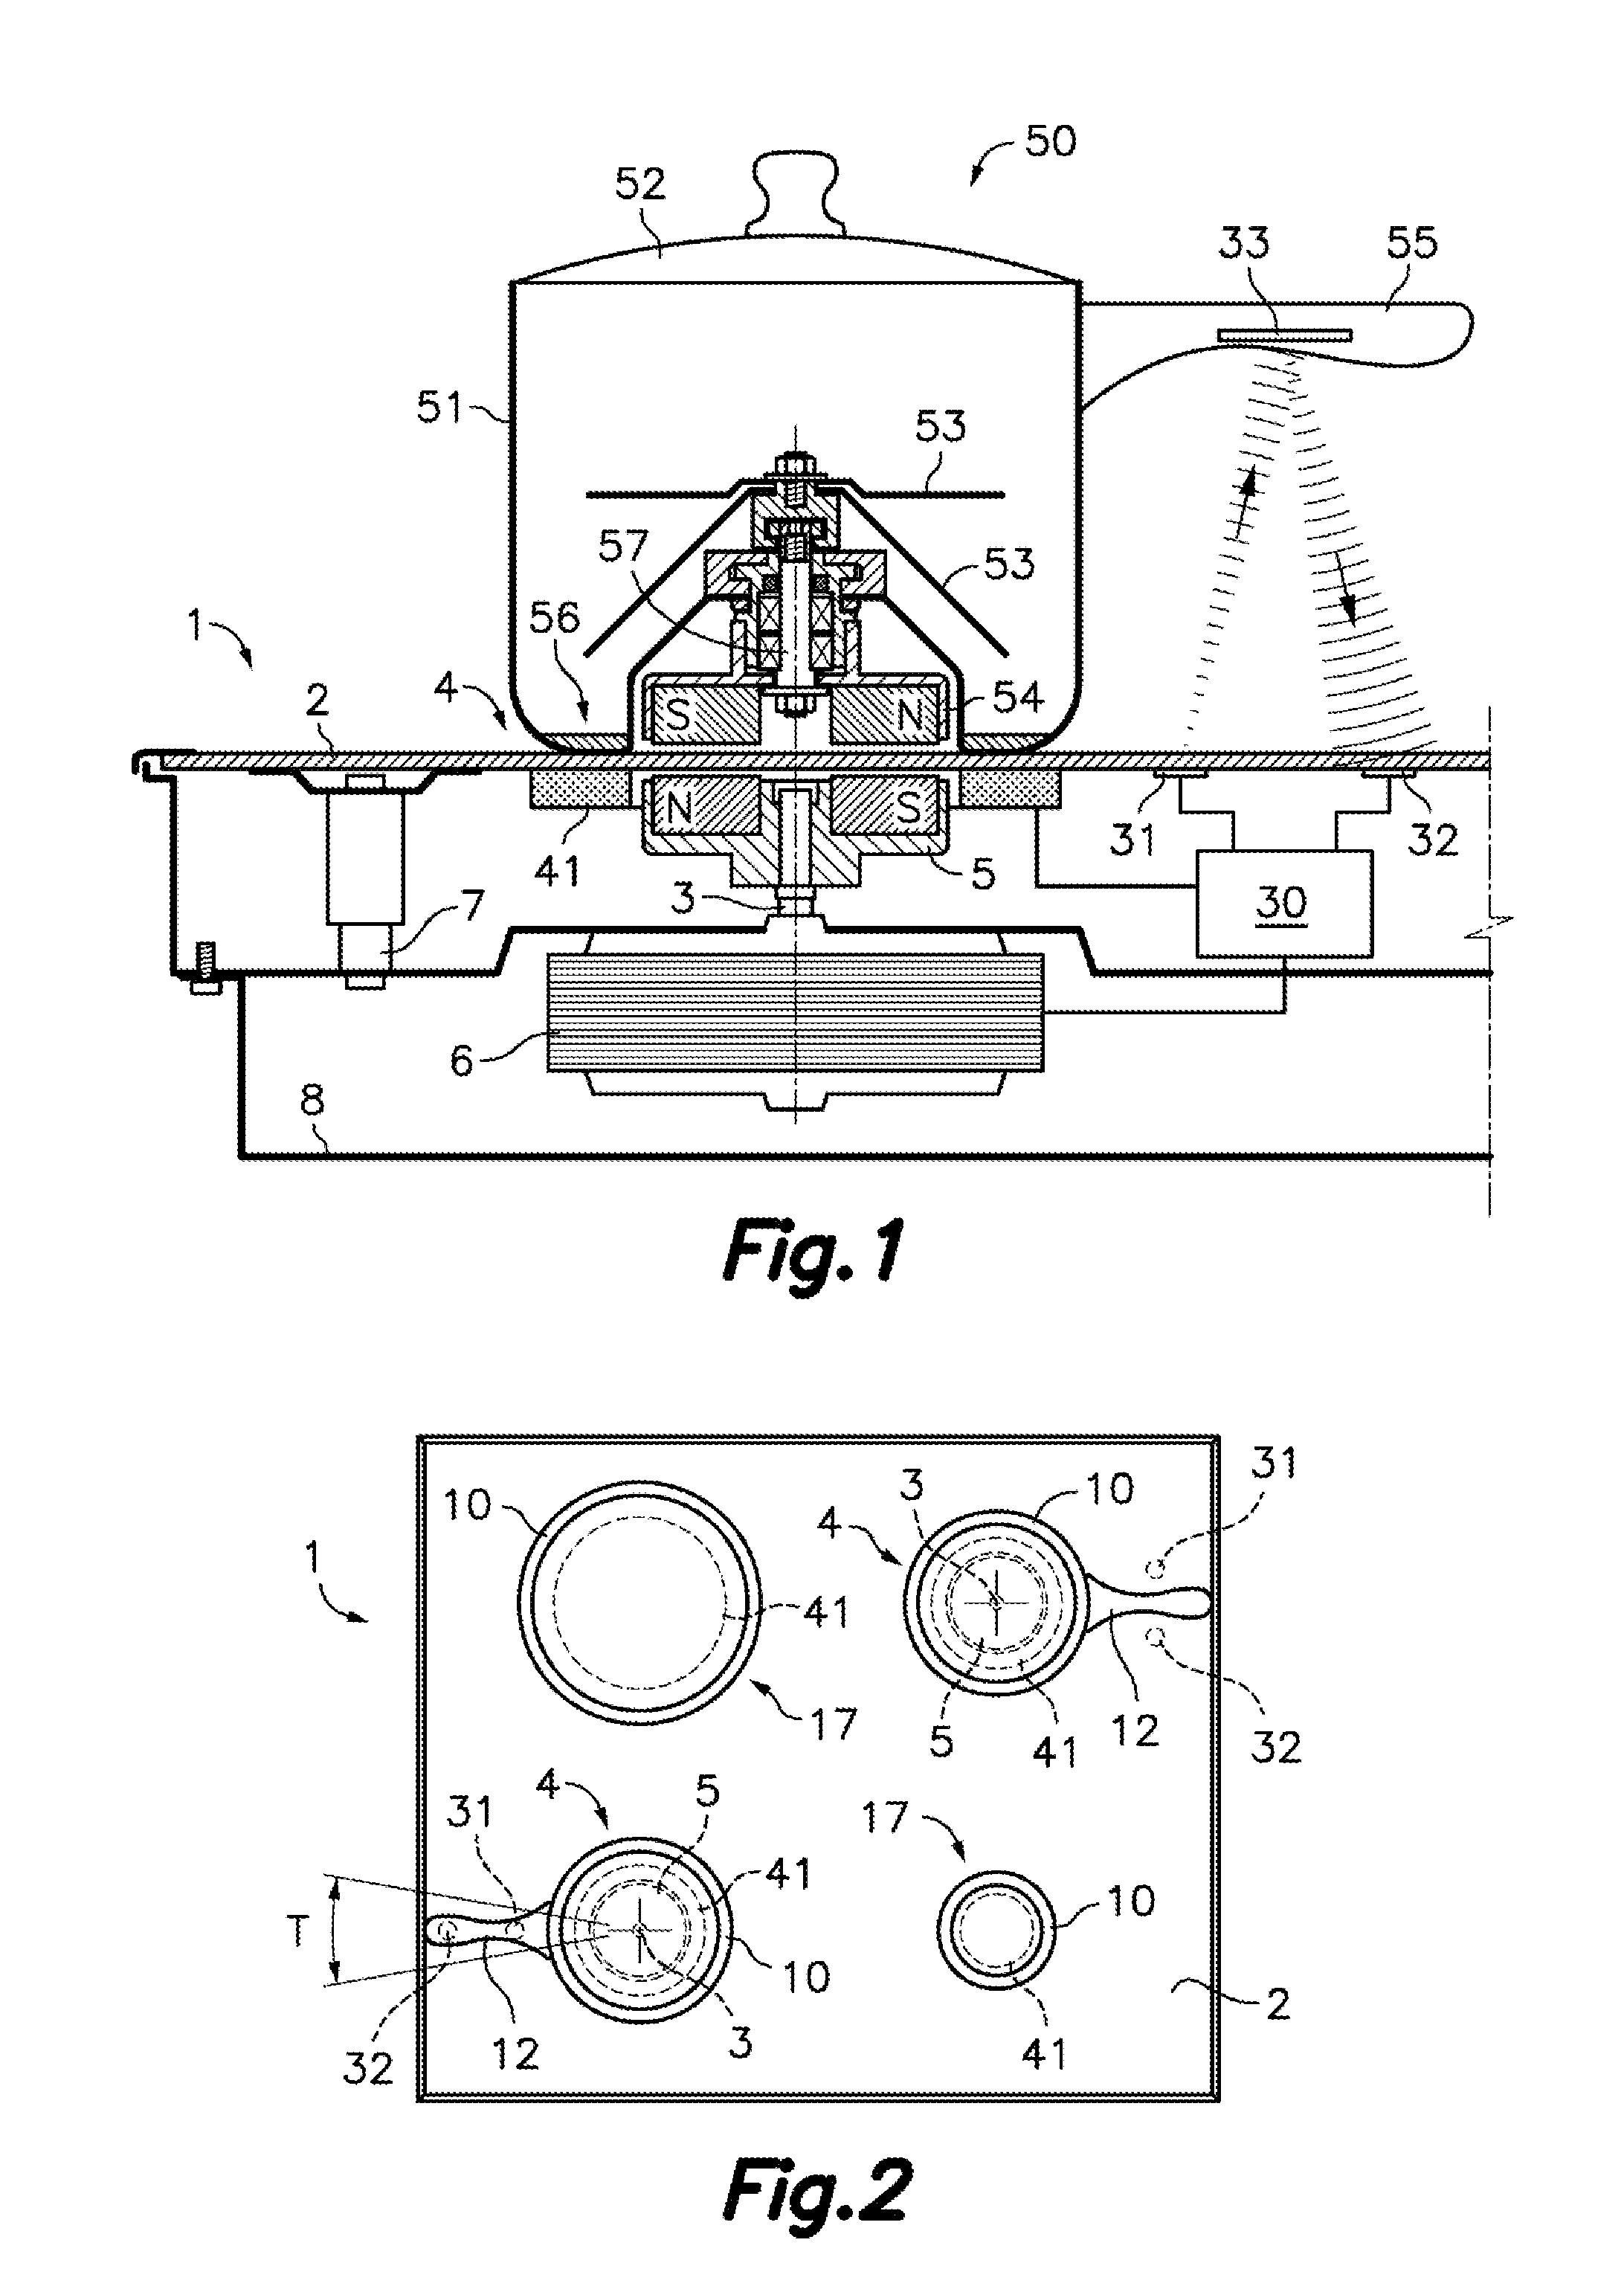 Cooking system including a cooking hob and a cooking vessel